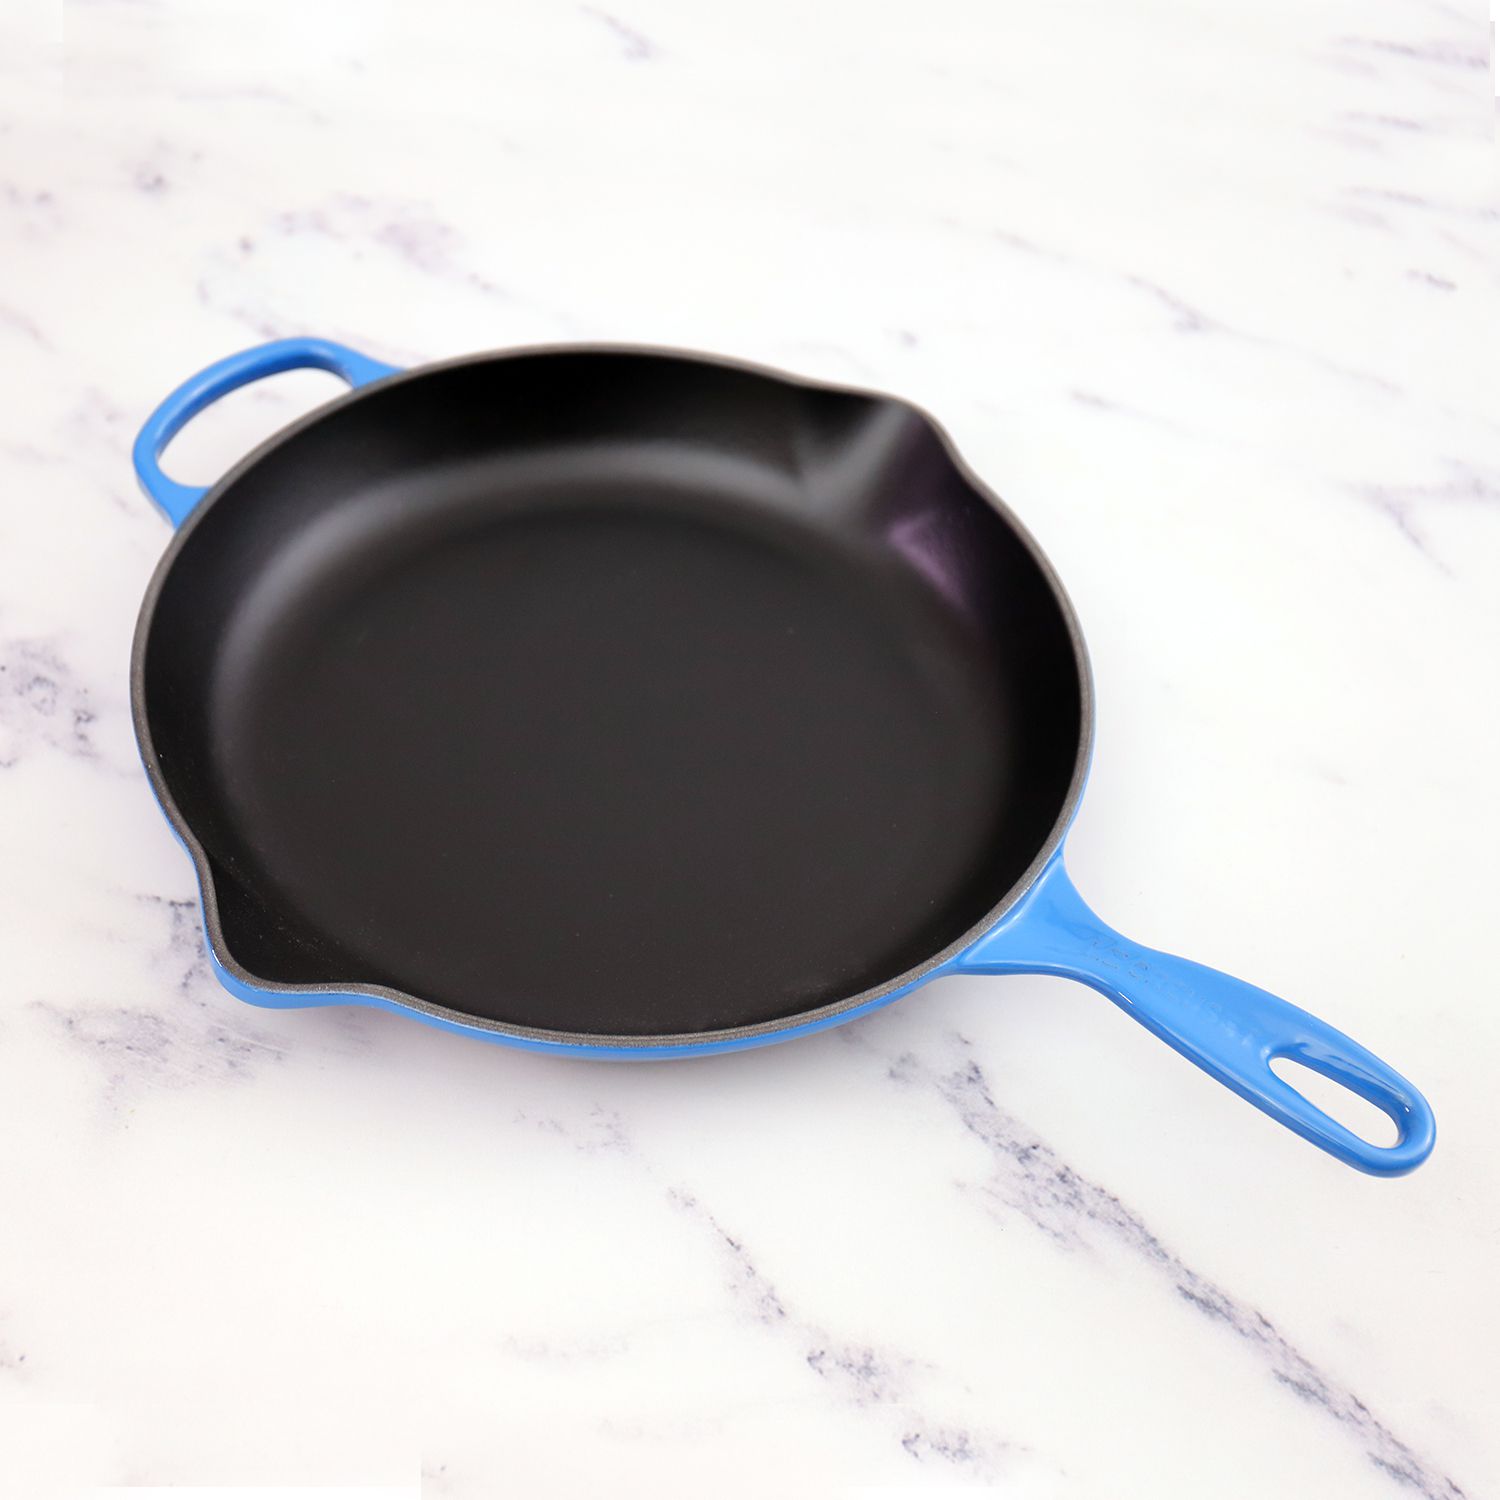 Le Creuset Signature Skillet on a marble counter